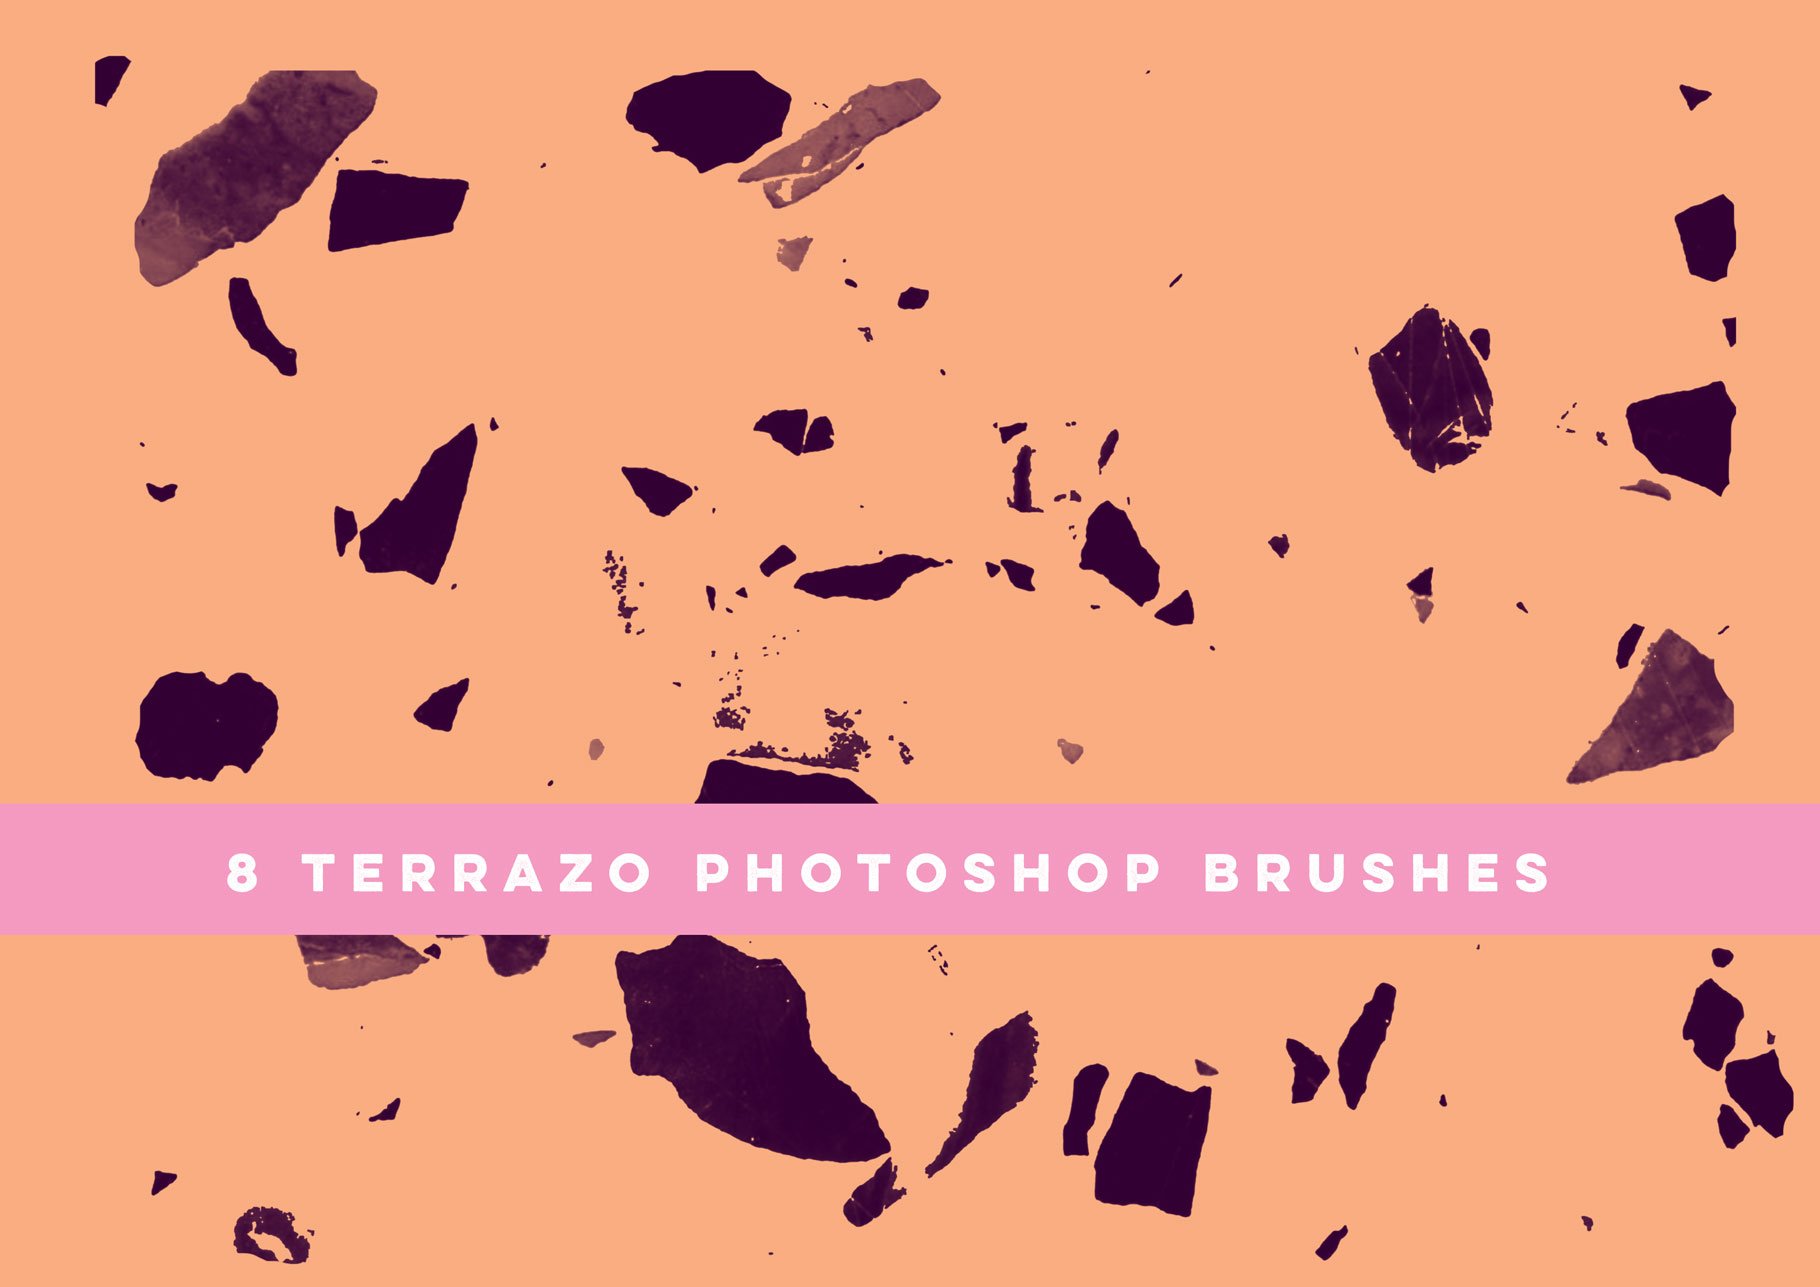 seesee terrazo brushes5 960